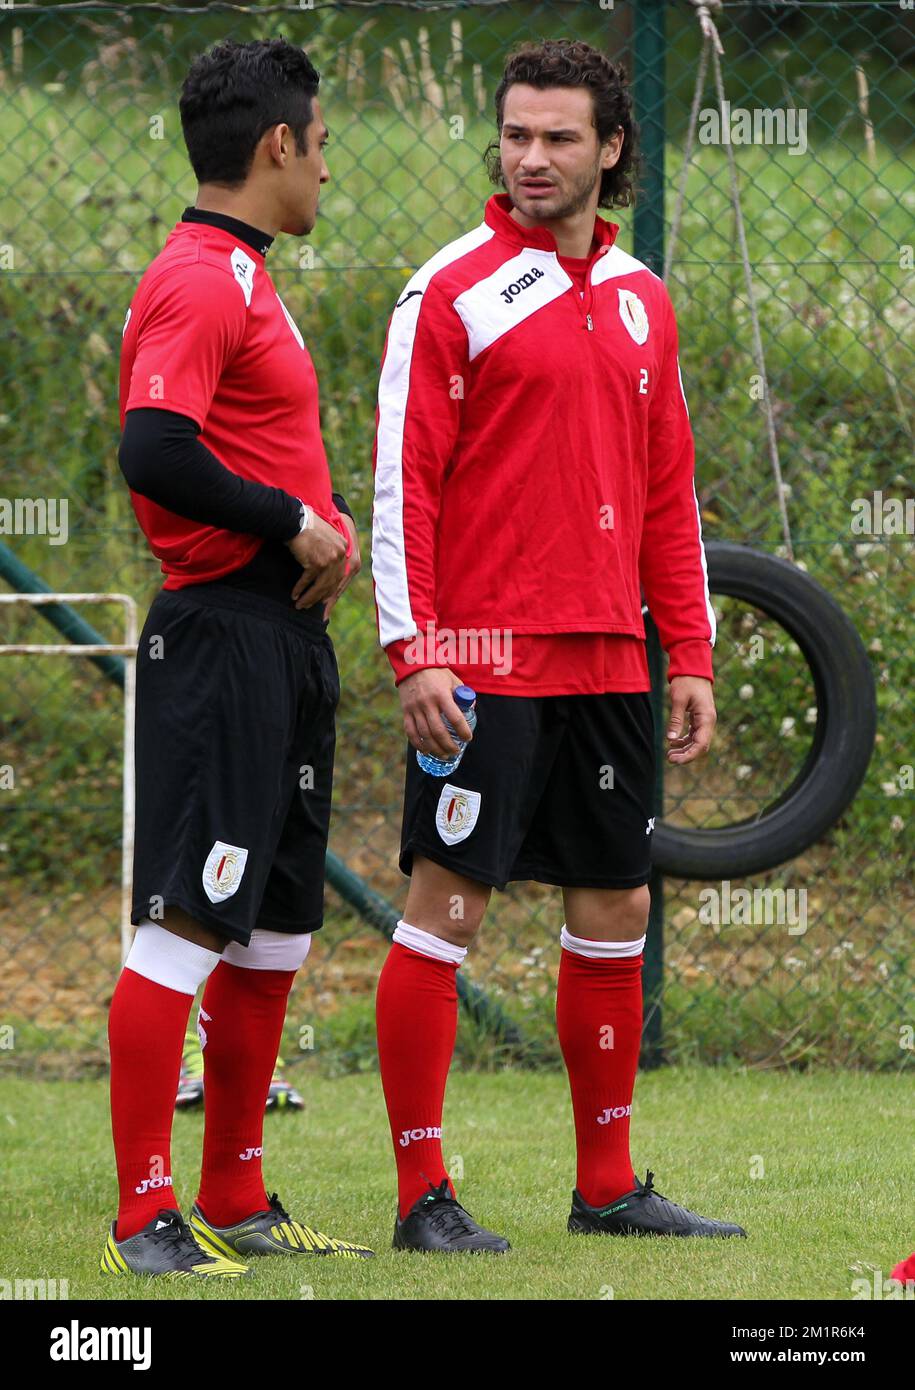 Standard's Reza Ghoochannejhad and Standard's Alessandro Iandoli pictured during a training session of Belgian first division soccer team Standard de Liege, Thursday 11 July 2013 in Liege.  Stock Photo